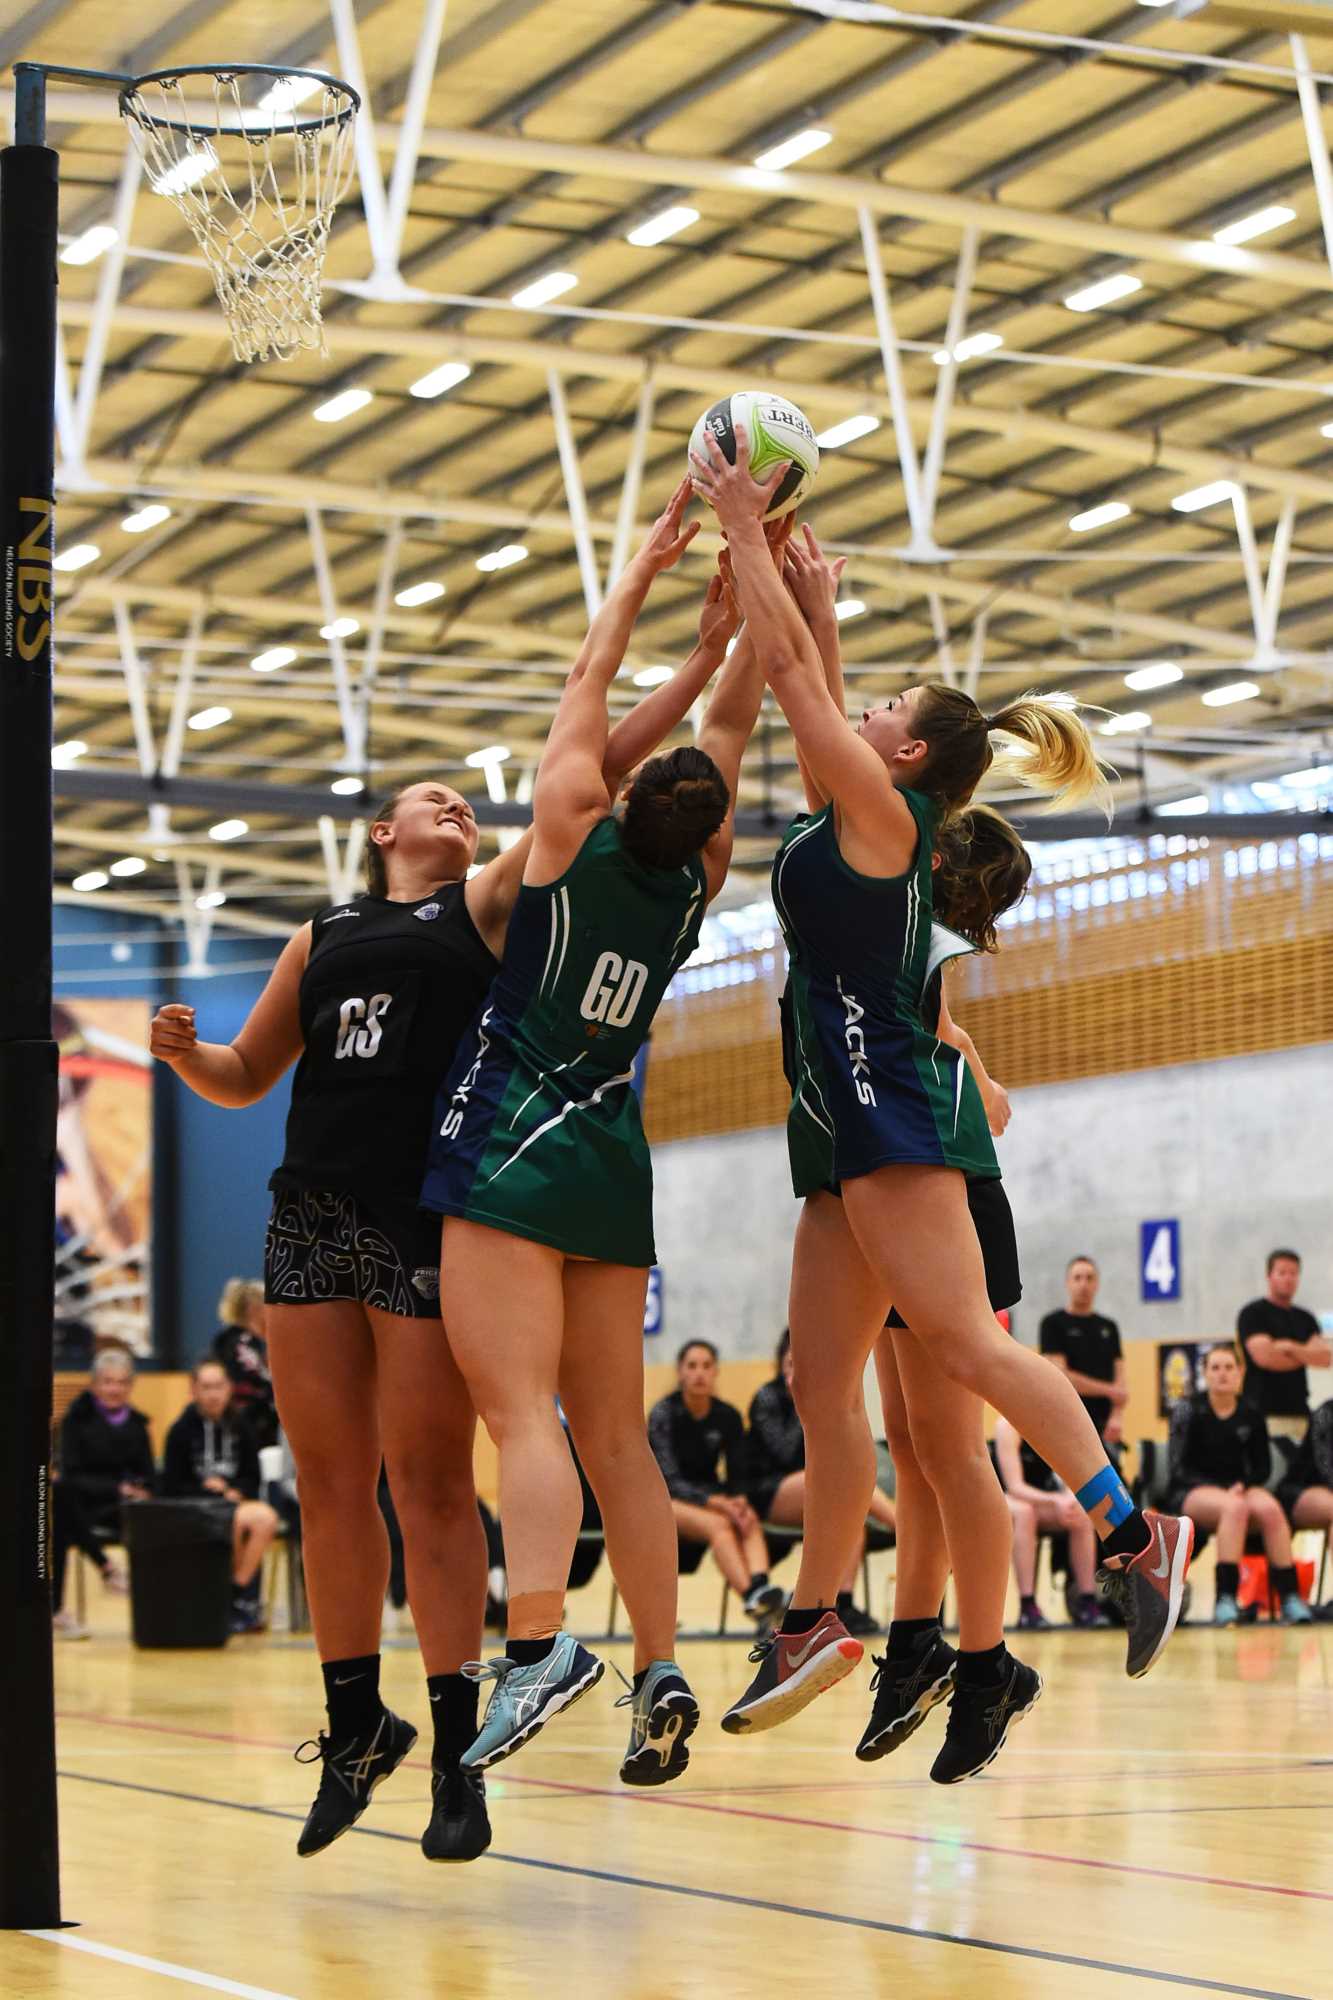 NELSON, NEW ZEALAND - AUGUST 31: Premiership Netball Final - Jacks OPD v Prices Ahurei. Saturday 31 August 2019 in Stoke, New Zealand. (Photo by Chris Symes/Shuttersport Limited)